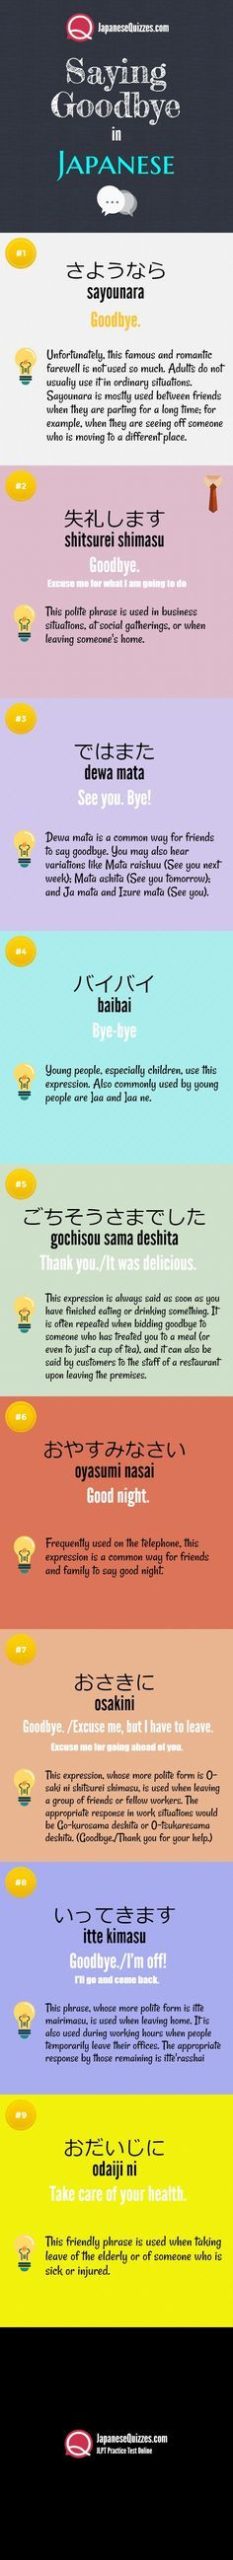 10 Ways to Say God Bye in Japanese